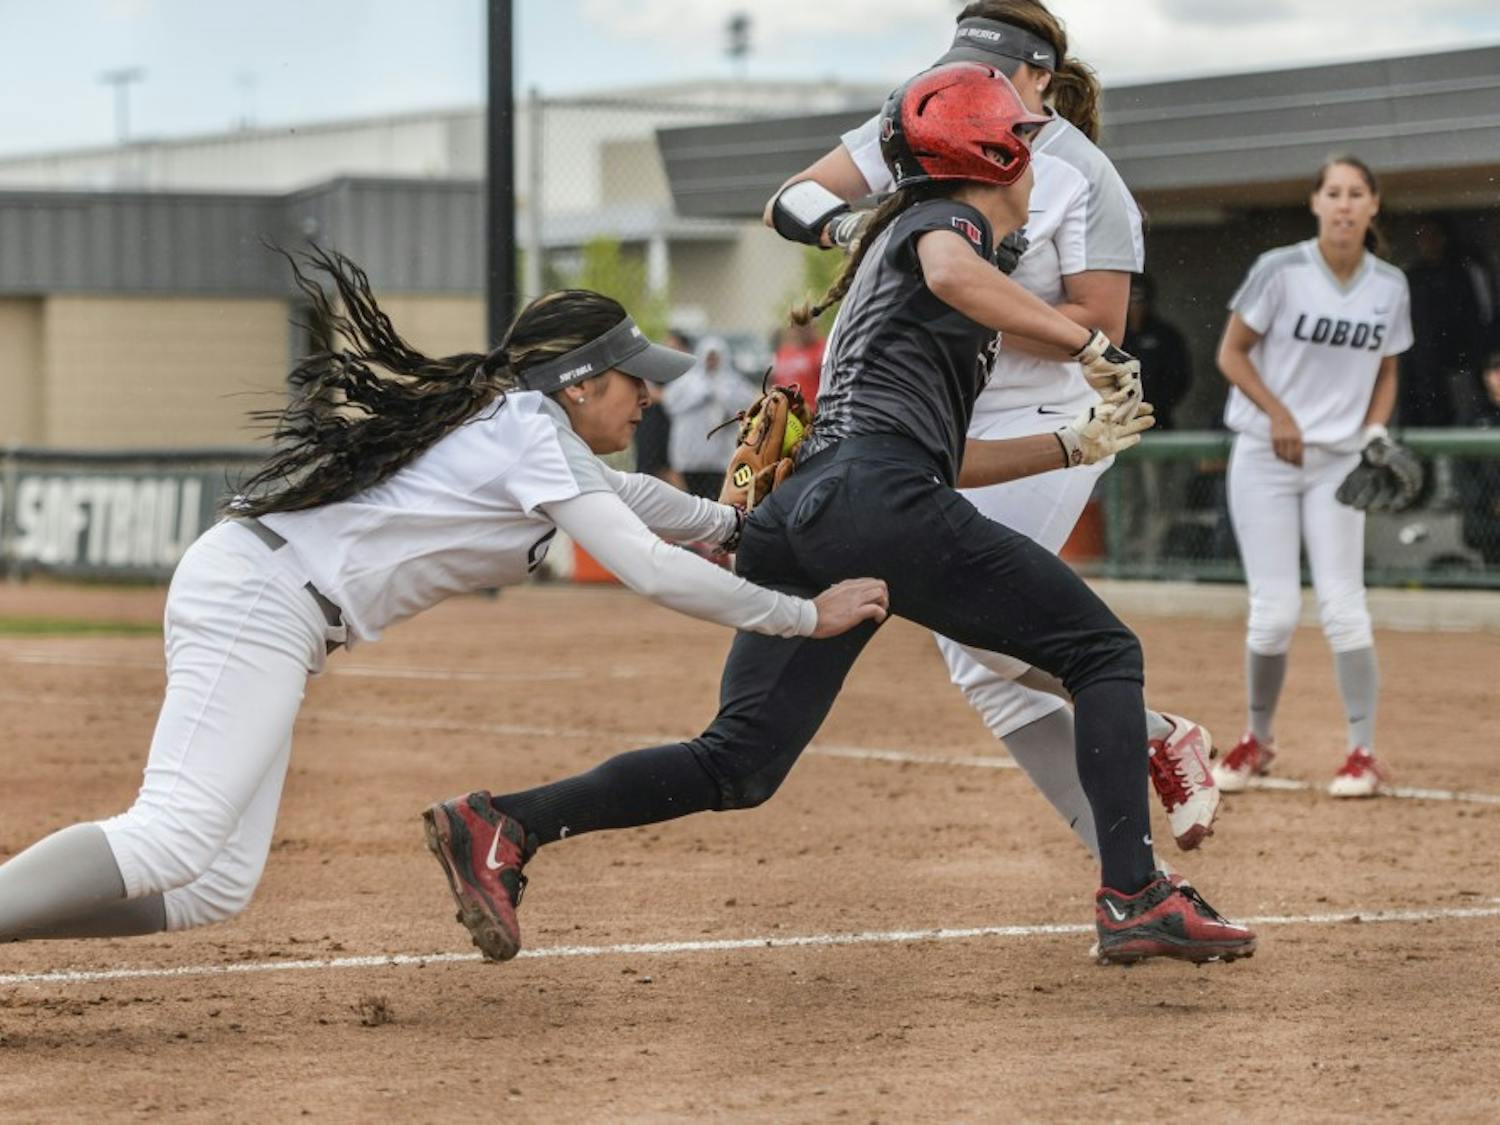 Junior infielder Michala Erickson tags out a San Diego State player Sunday afternoon at the Lobo Softball Fields. The Lobos beat the Aztecs 3-2.&nbsp;